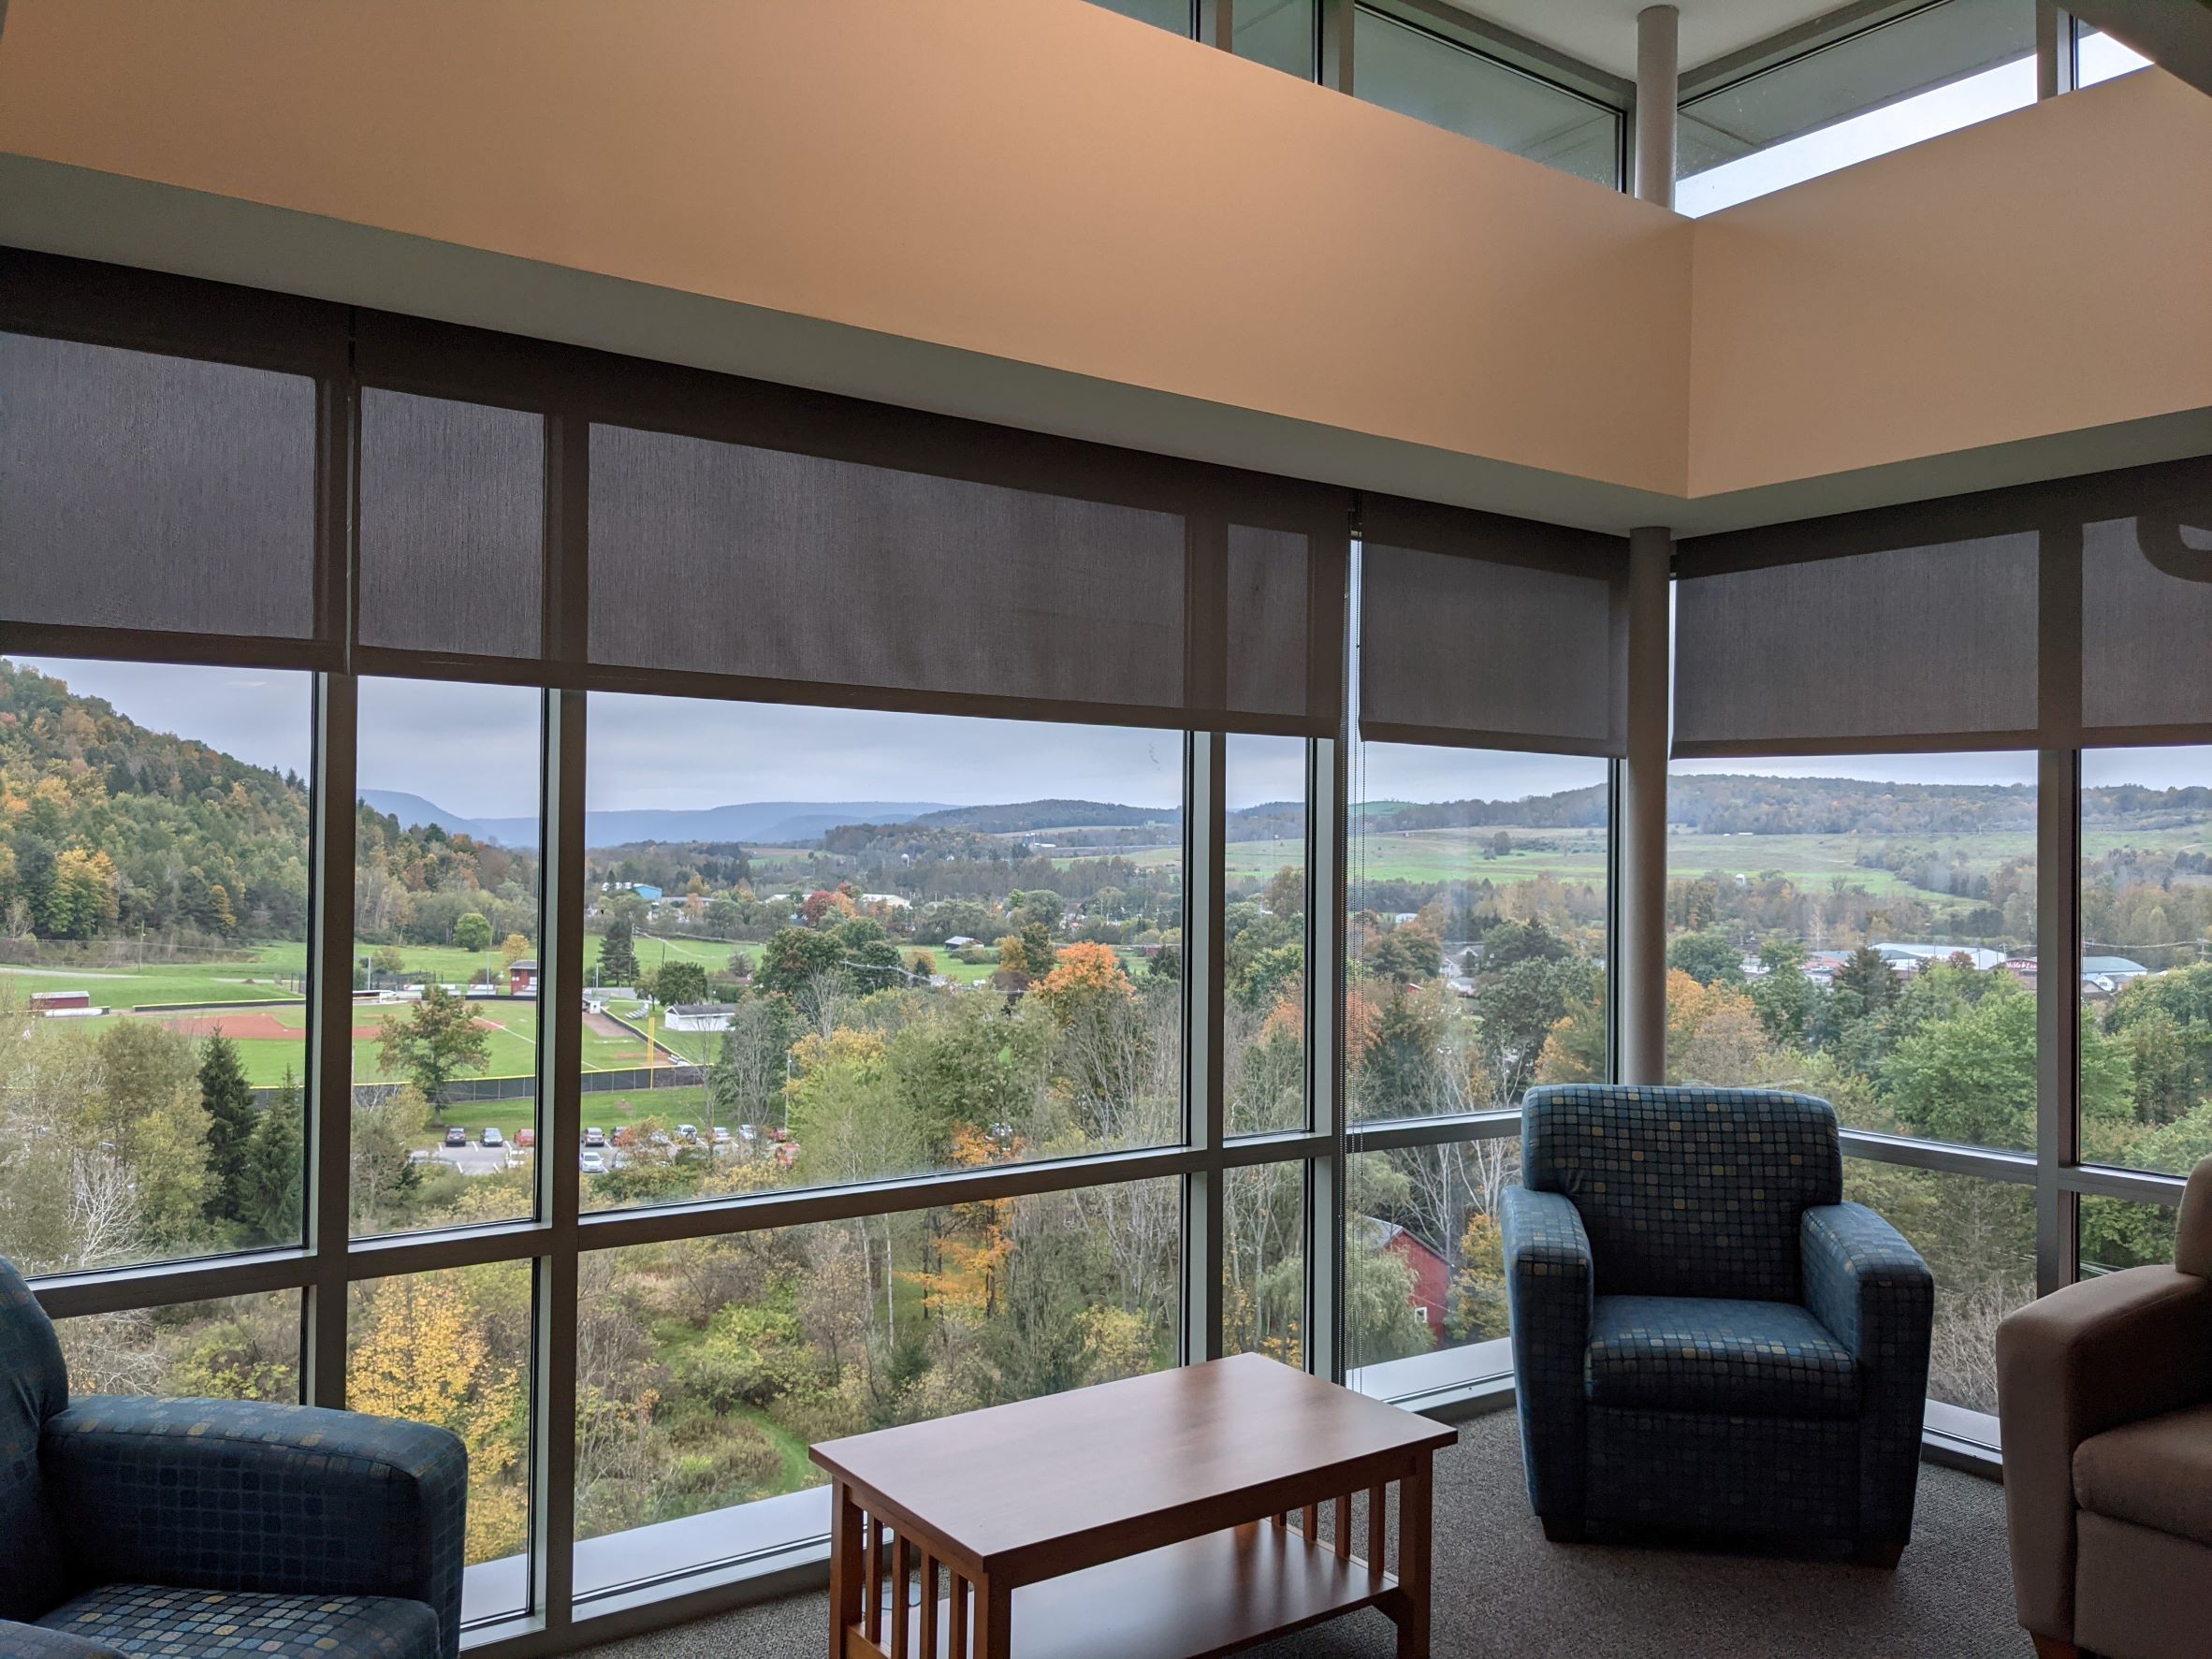 Student Housing Living Room with floor to ceiling glass windows overlooking surrounding mountainside to maximize views
